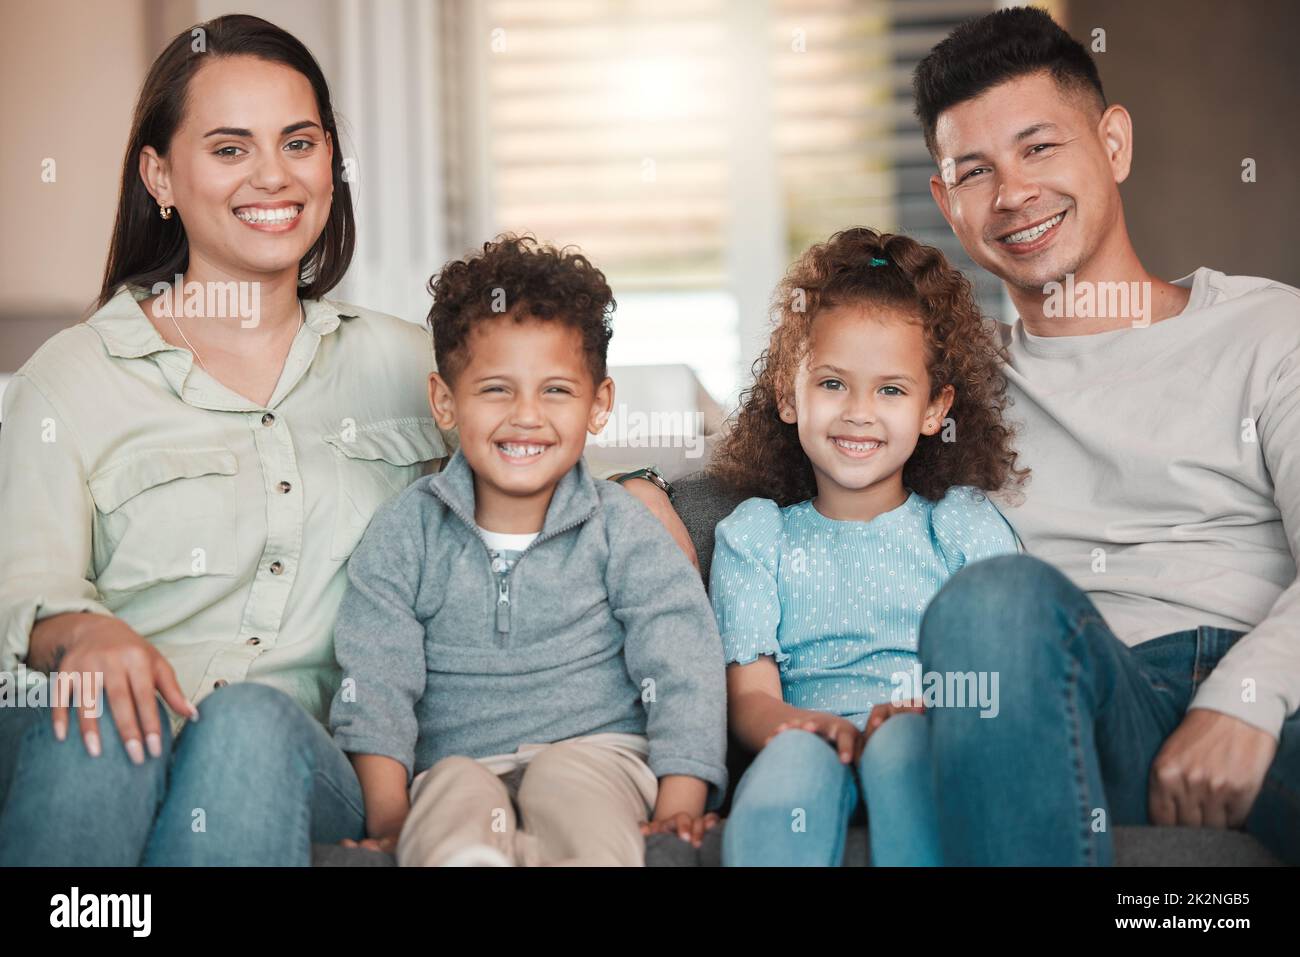 So much happiness. Shot of a young family spending time together at home. Stock Photo